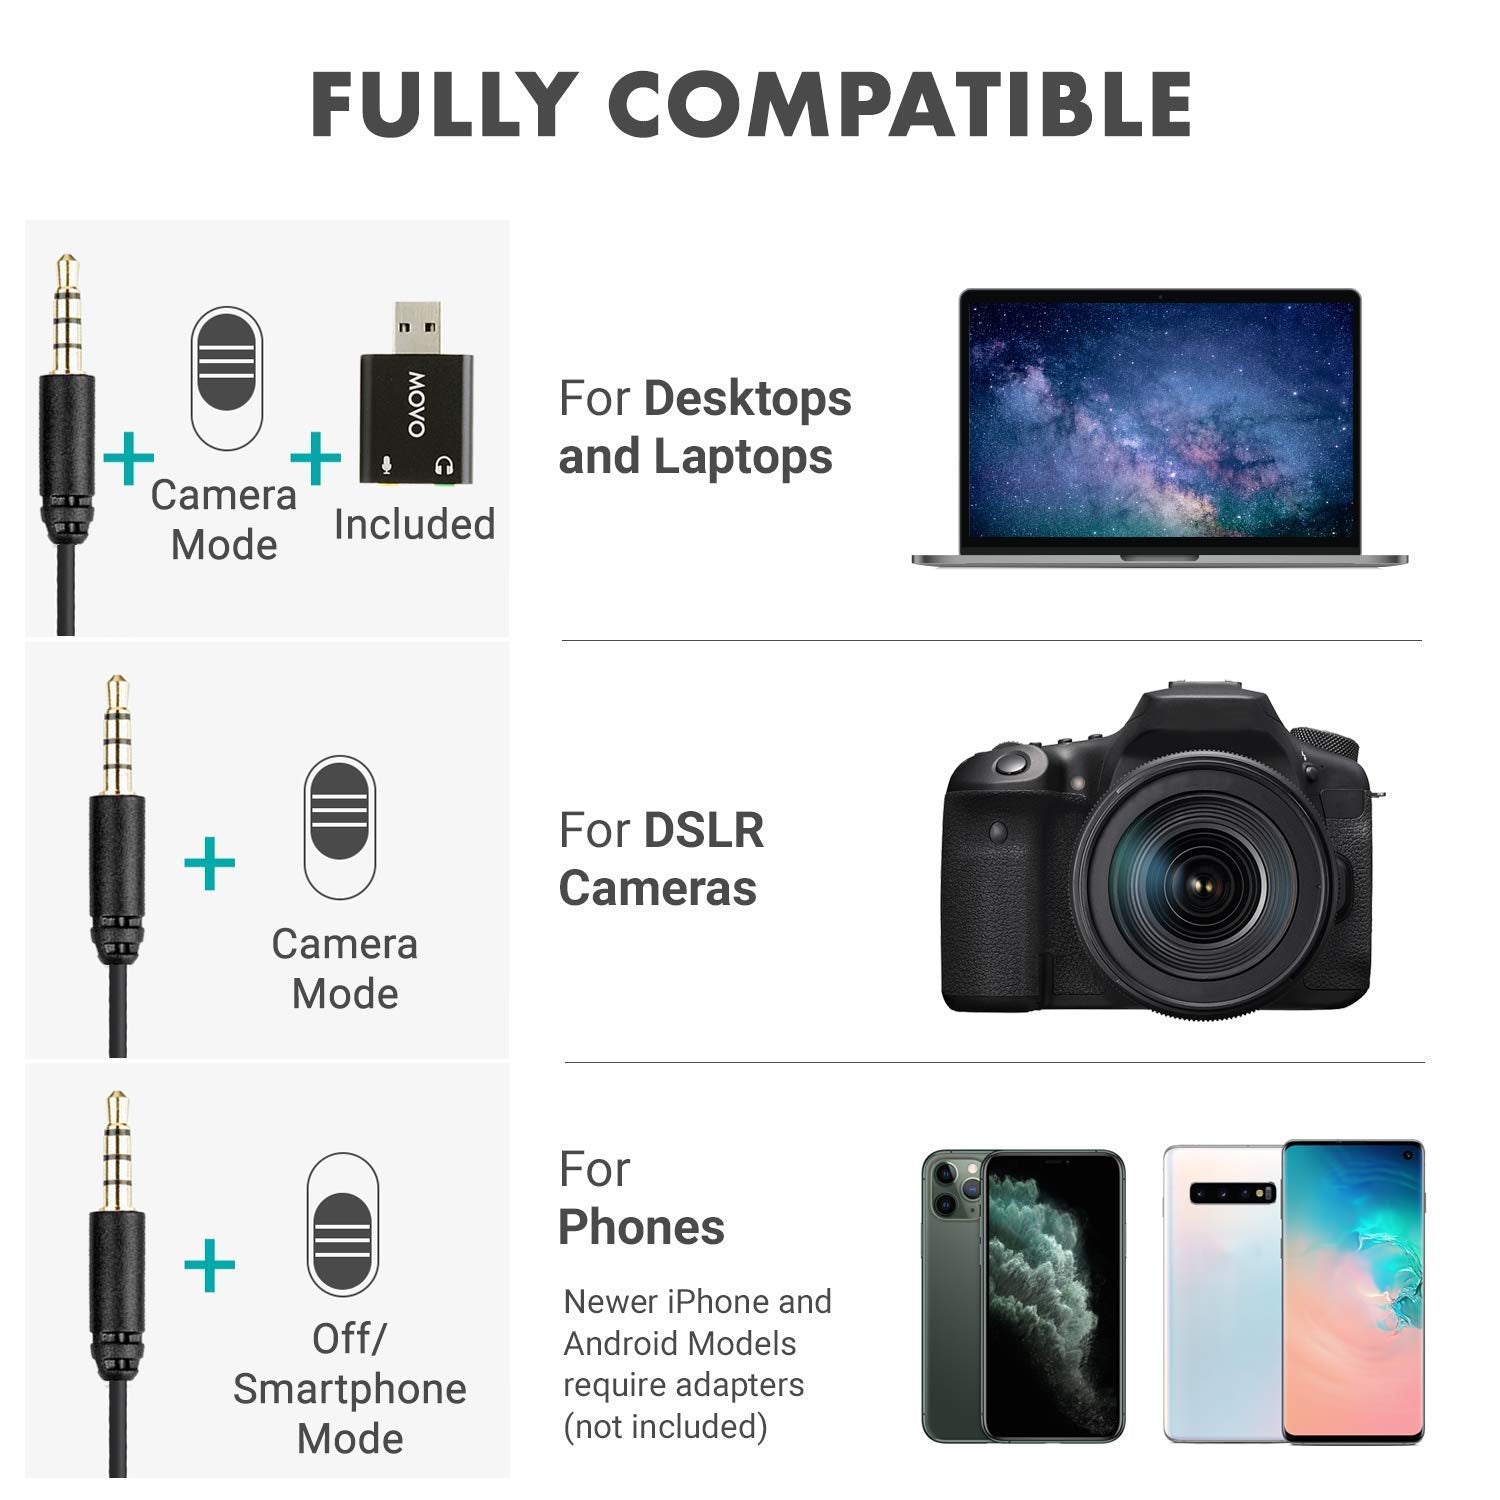 Movo LV1-USB Lavalier Microphone for Computer, Lapel Microphone for iPhone and Android Smartphones, Lav Mic, Clip on Microphone for 3.5mm, USB, Laptop, Desktop, PC, Mac, Cameras, Podcasting, YouTube  - Good